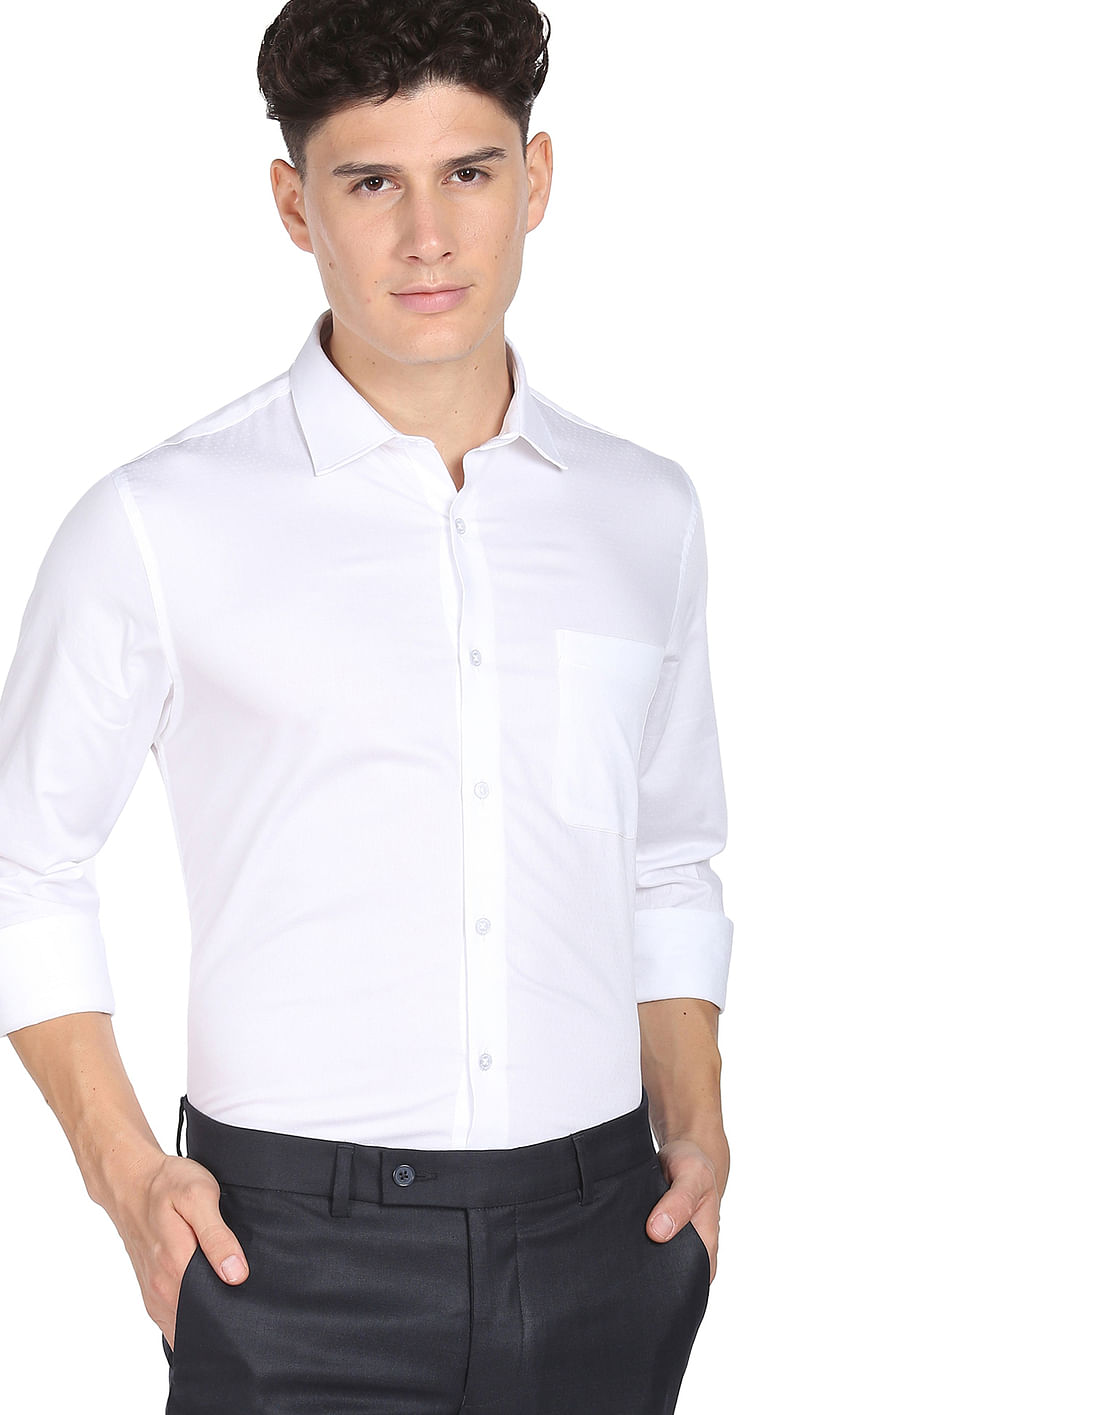 Buy AD by Arvind Self Design Cotton Dobby Formal Shirt - NNNOW.com